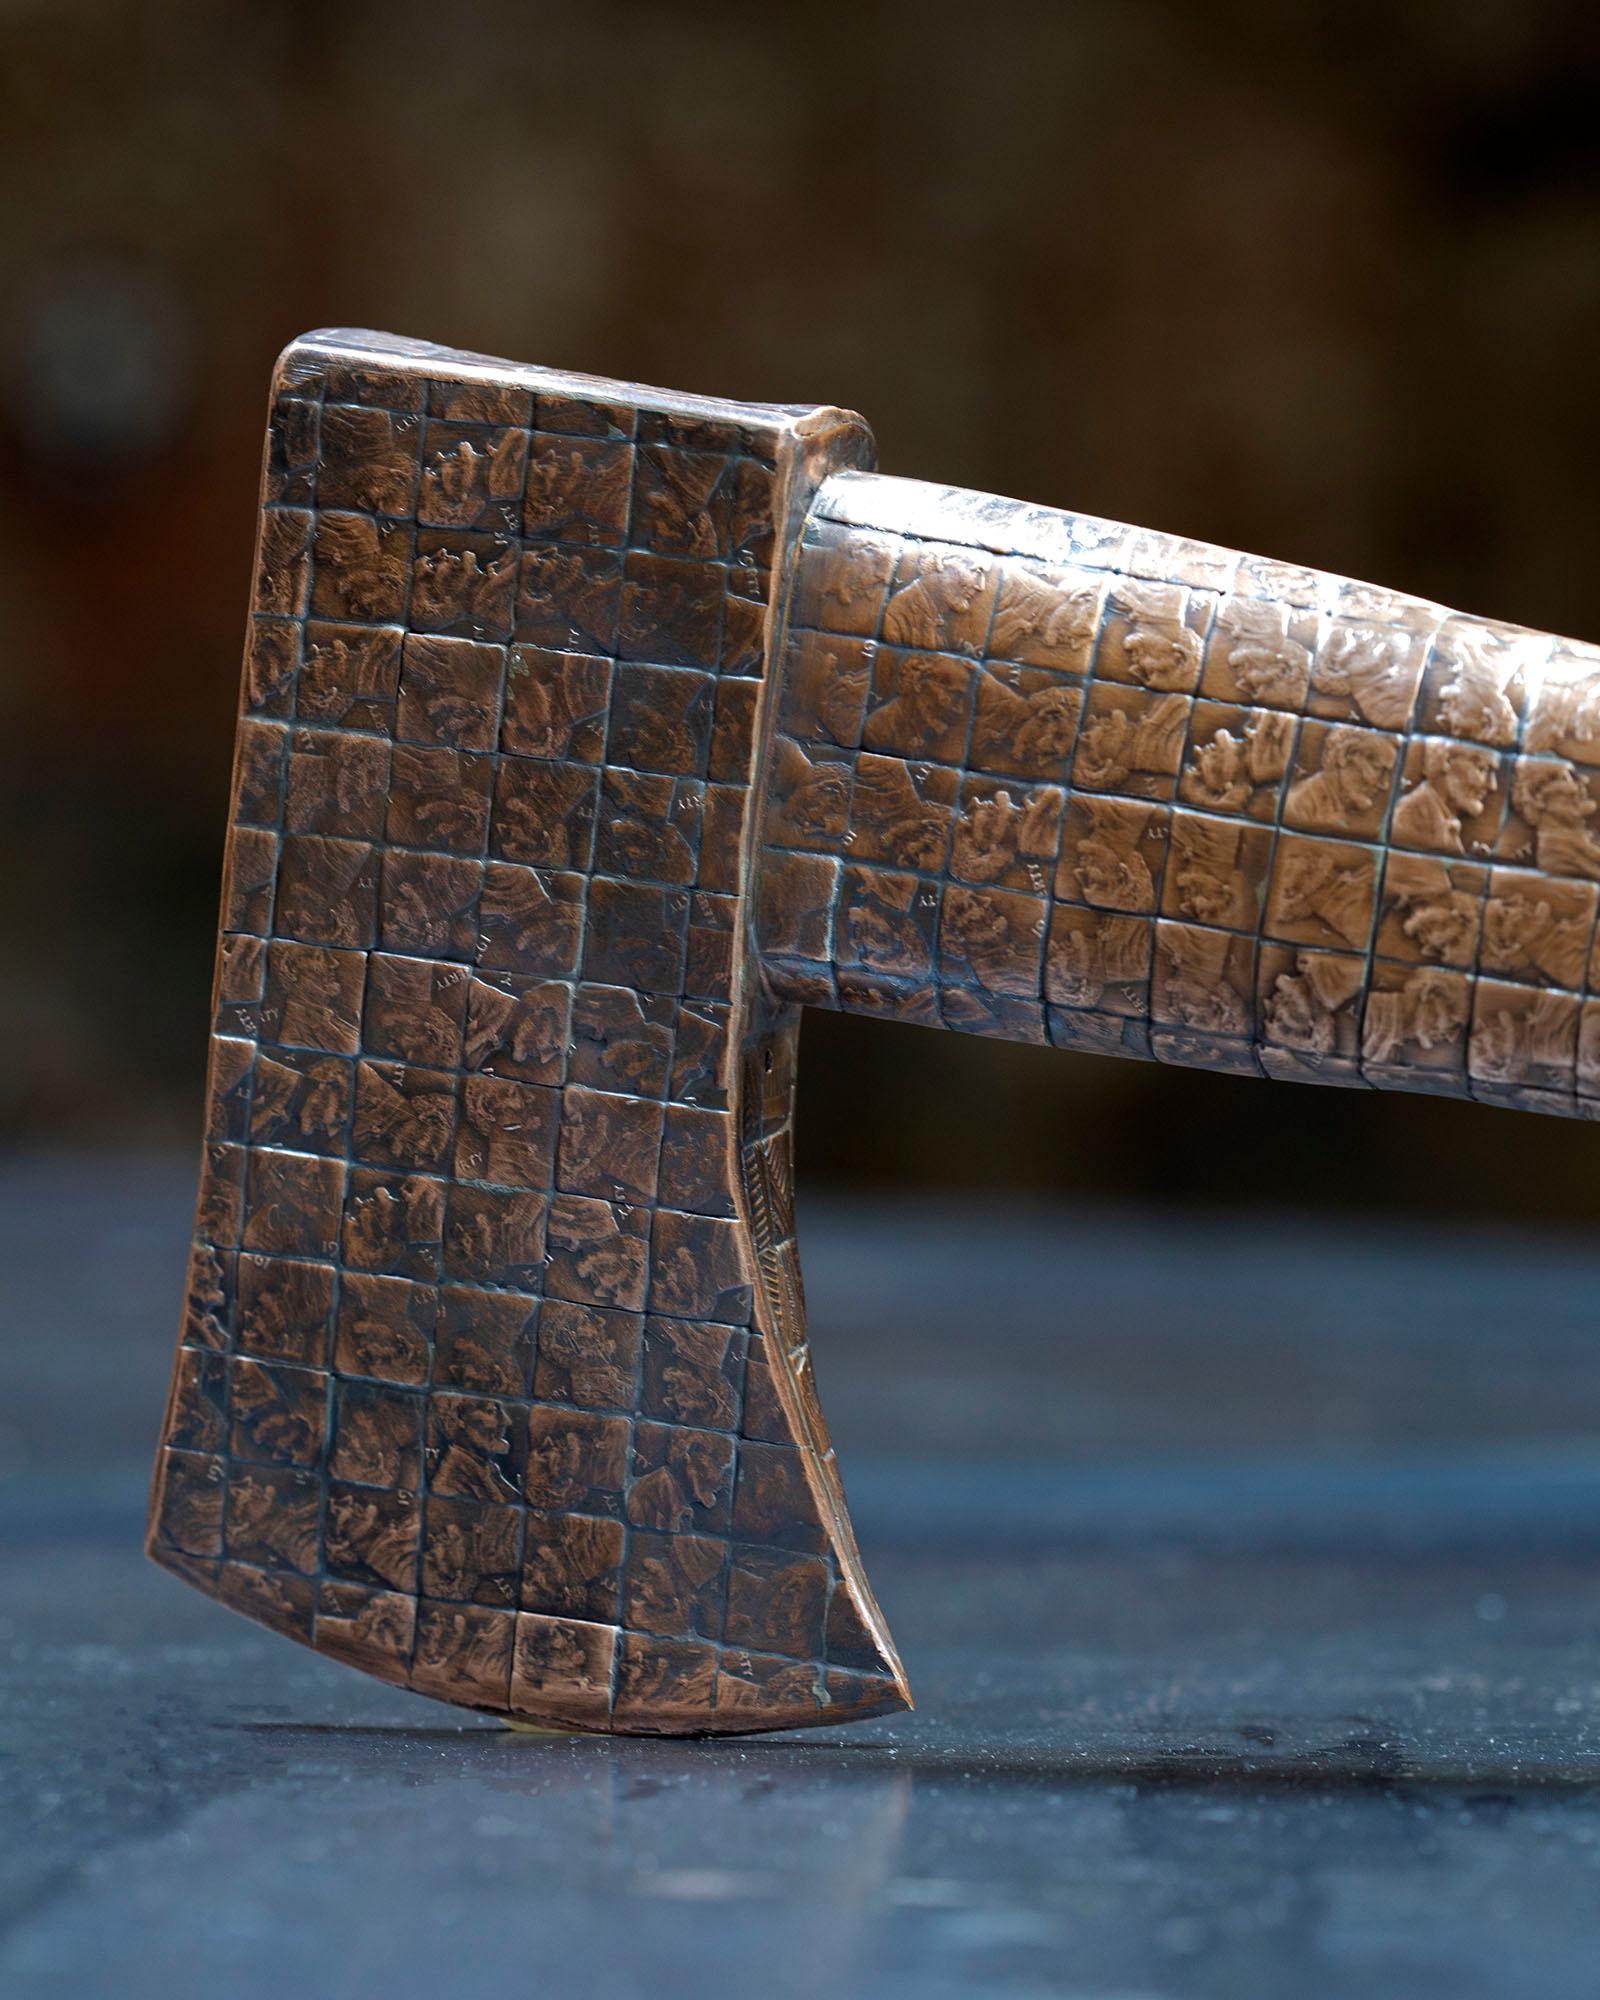 The Craftsmen Series: Hatchet

Soldered and fabricated solid copper US pennies, hollow metal construction.

The Craftsmen Series contains working man's tools recreated in copper pennies that are entirely hollow and true to size. The ghostlike